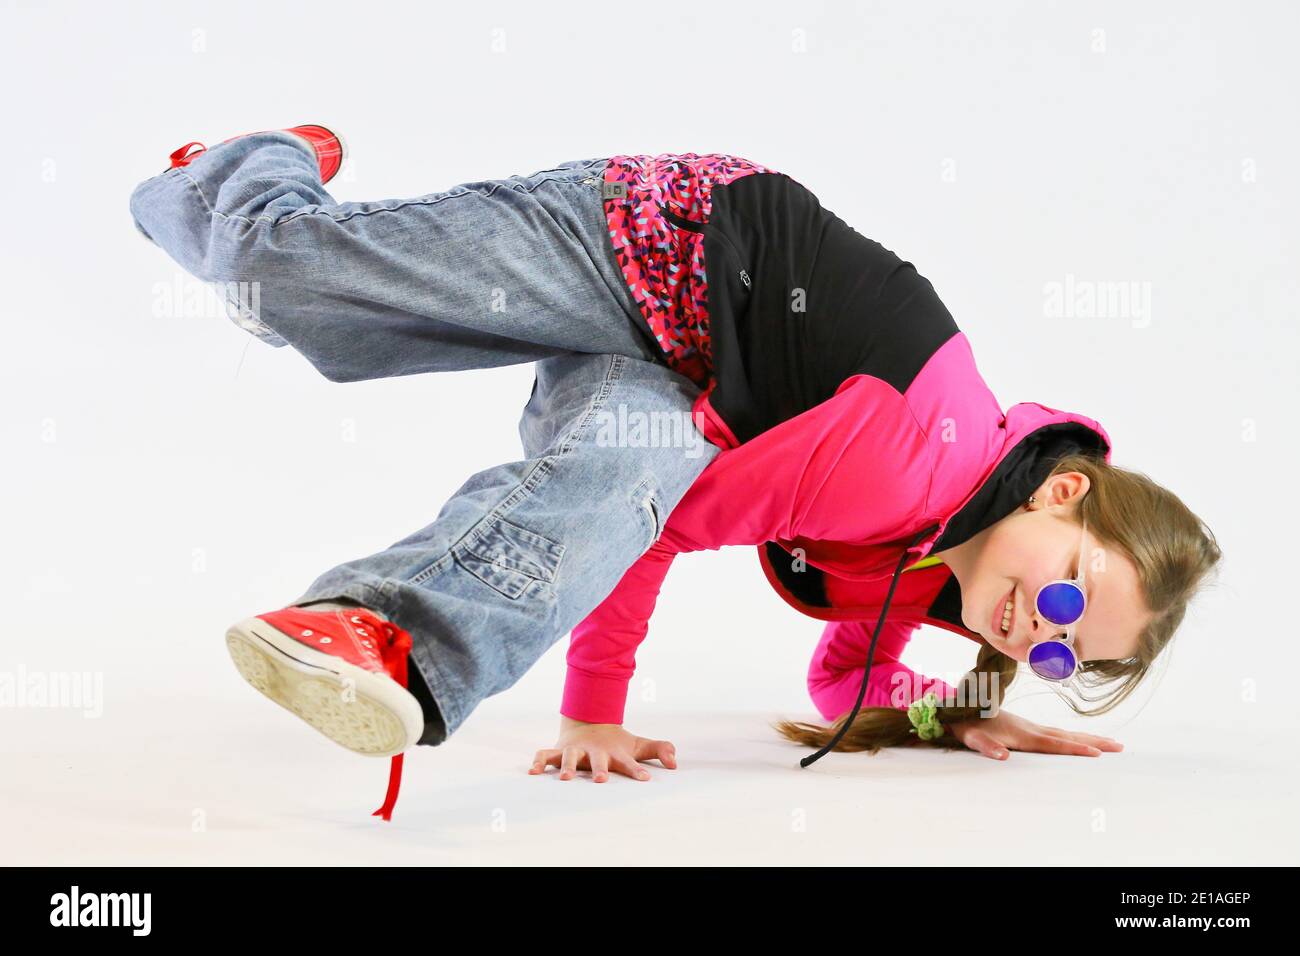 little girl in a difficult breakdance position Stock Photo